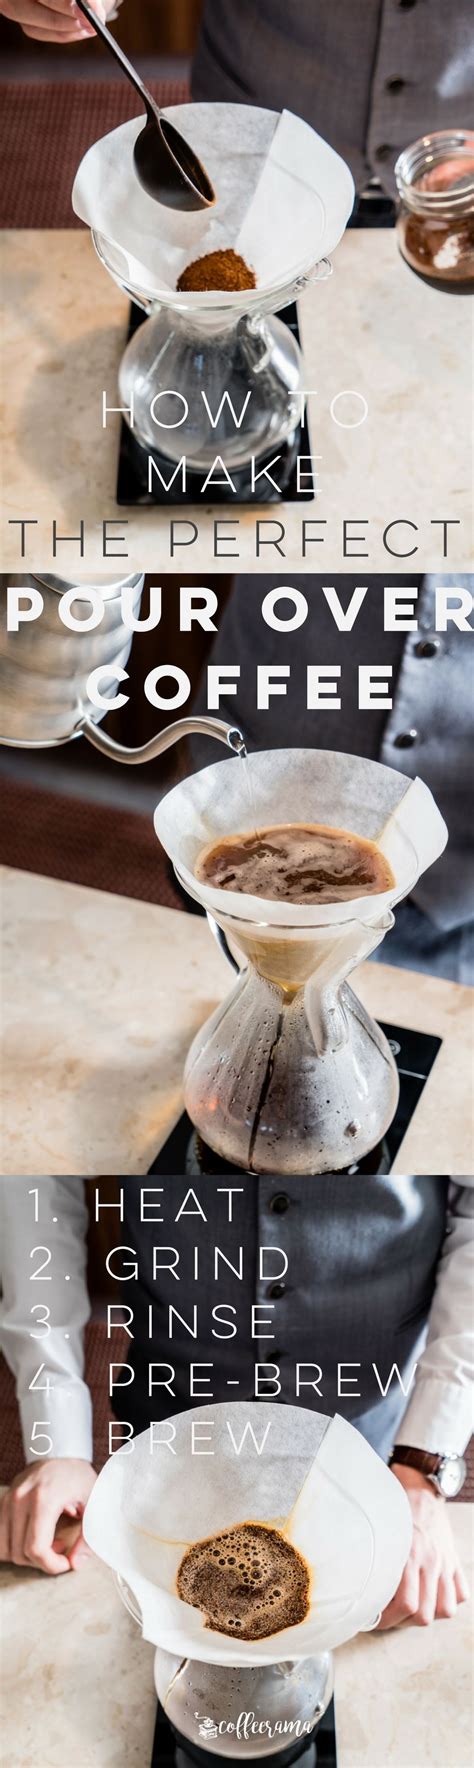 How To Make The Perfect Pour Over Coffee Coffeerama Pour Over